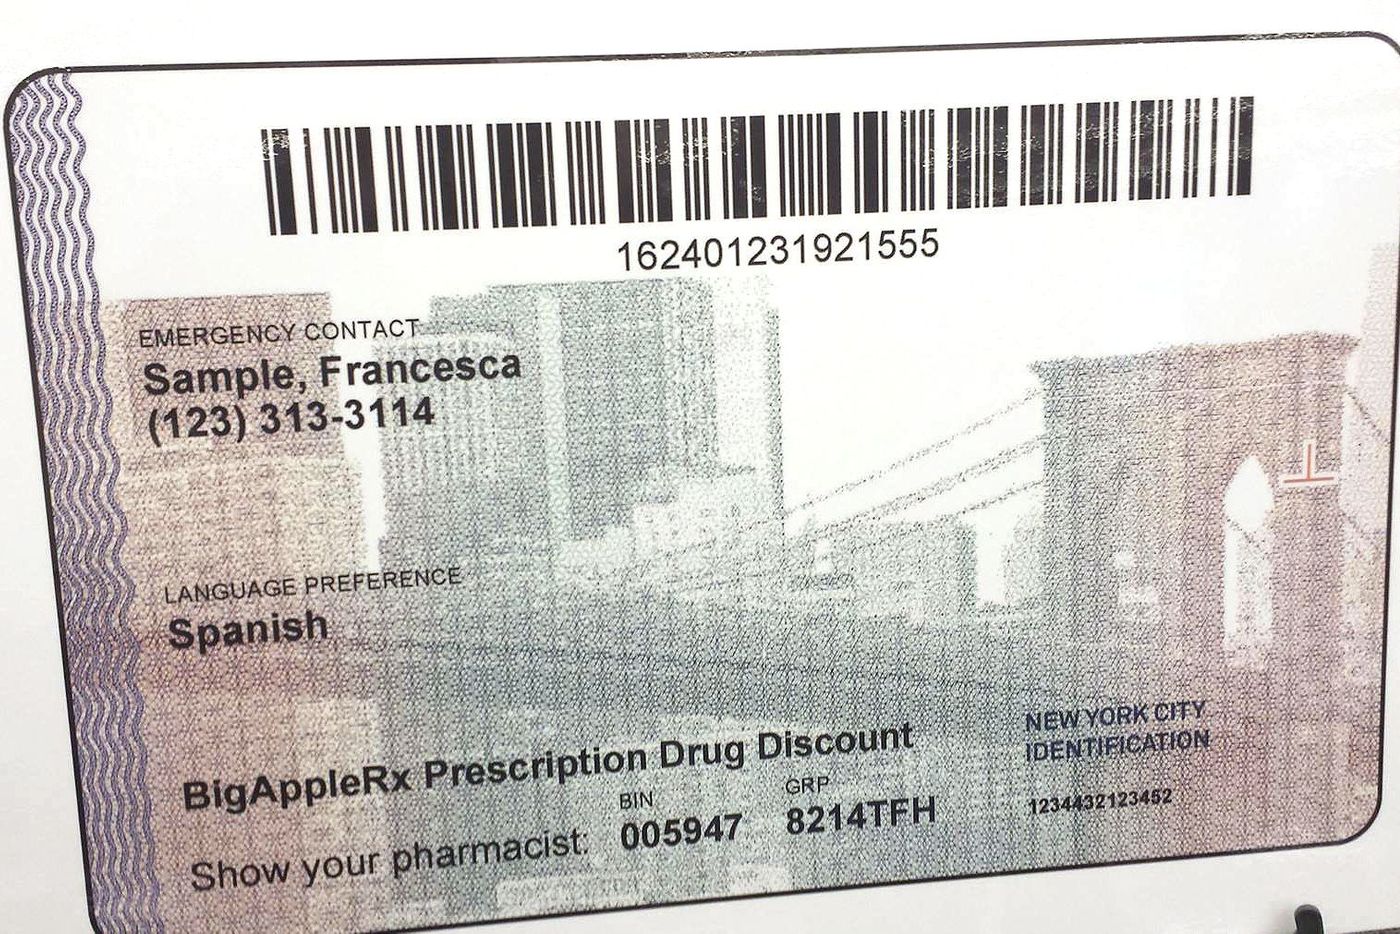 A sample IDNYC card touts its prescription drug discount on the back.